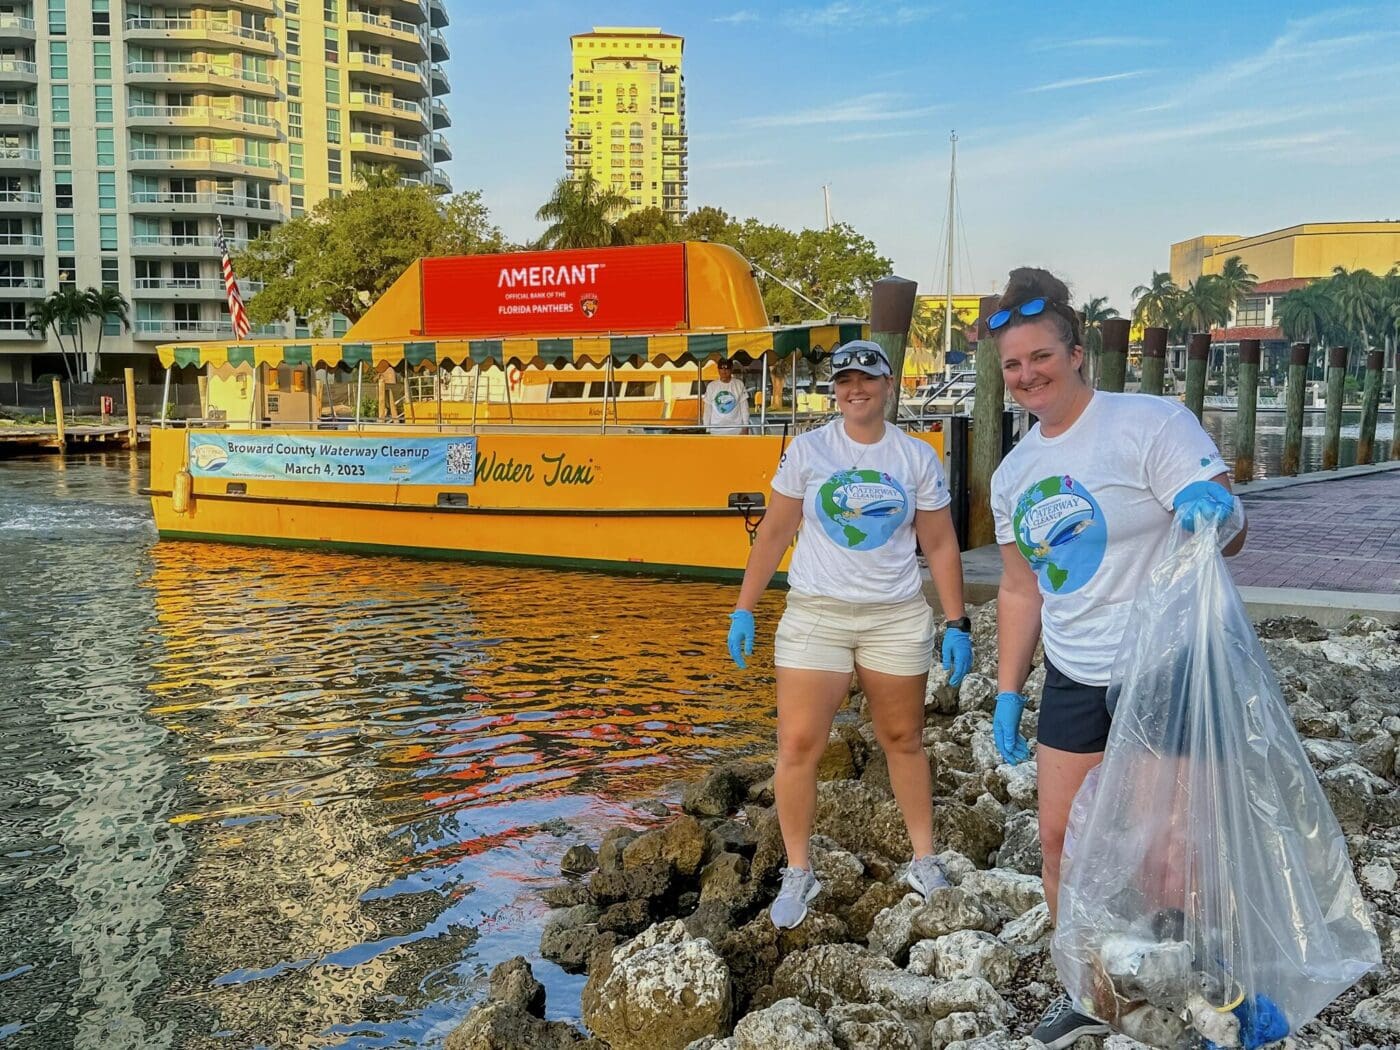 2 girls cleaning up debris in fort lauderdale with amerant bank advertisement in background.